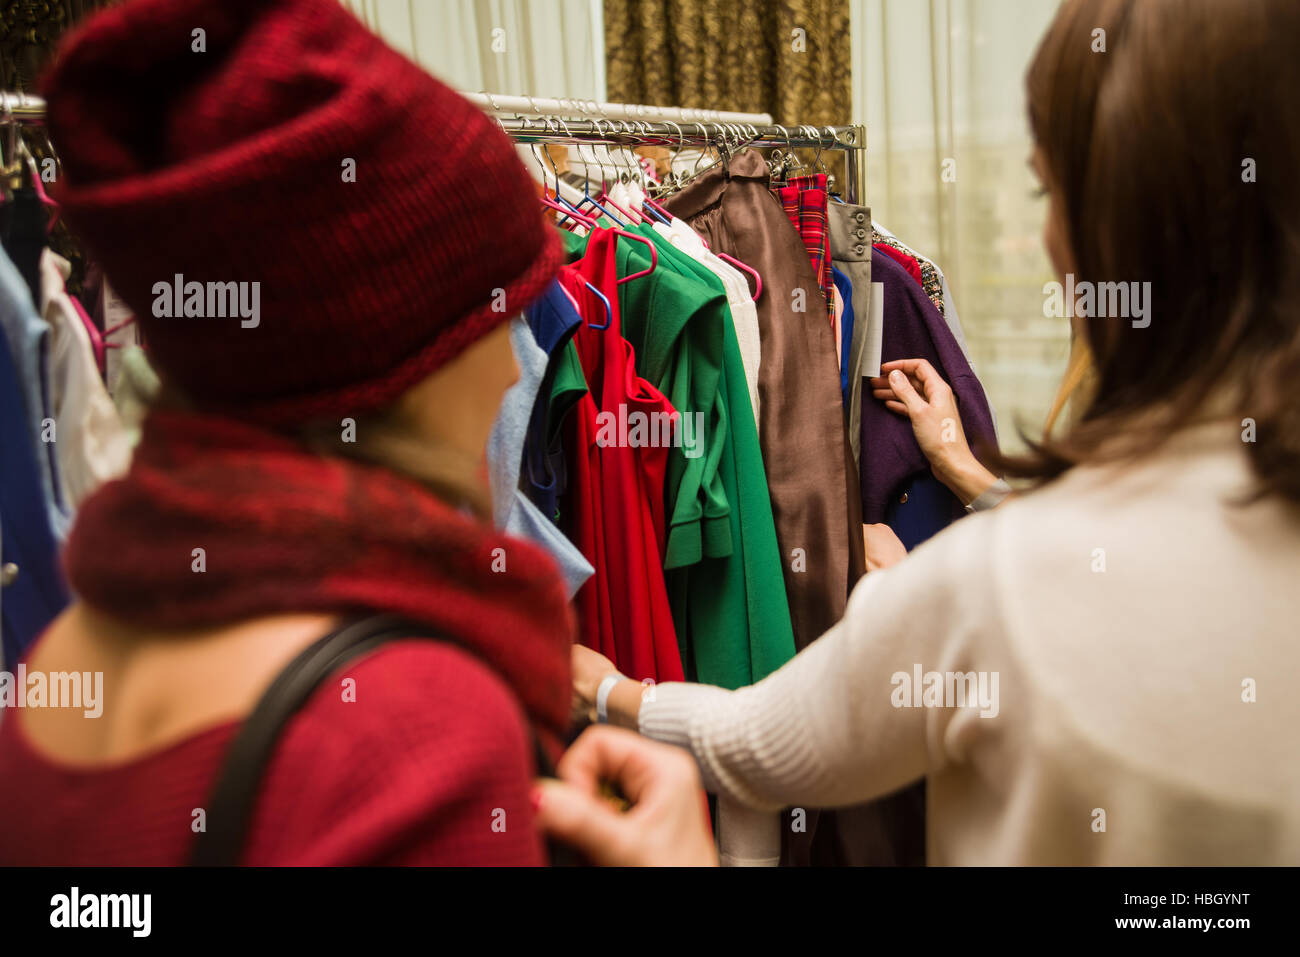 Group of young beautiful women shopping in fashion mall, choosing new clothes, looking through hangers with different casual colorful garments on hang Stock Photo